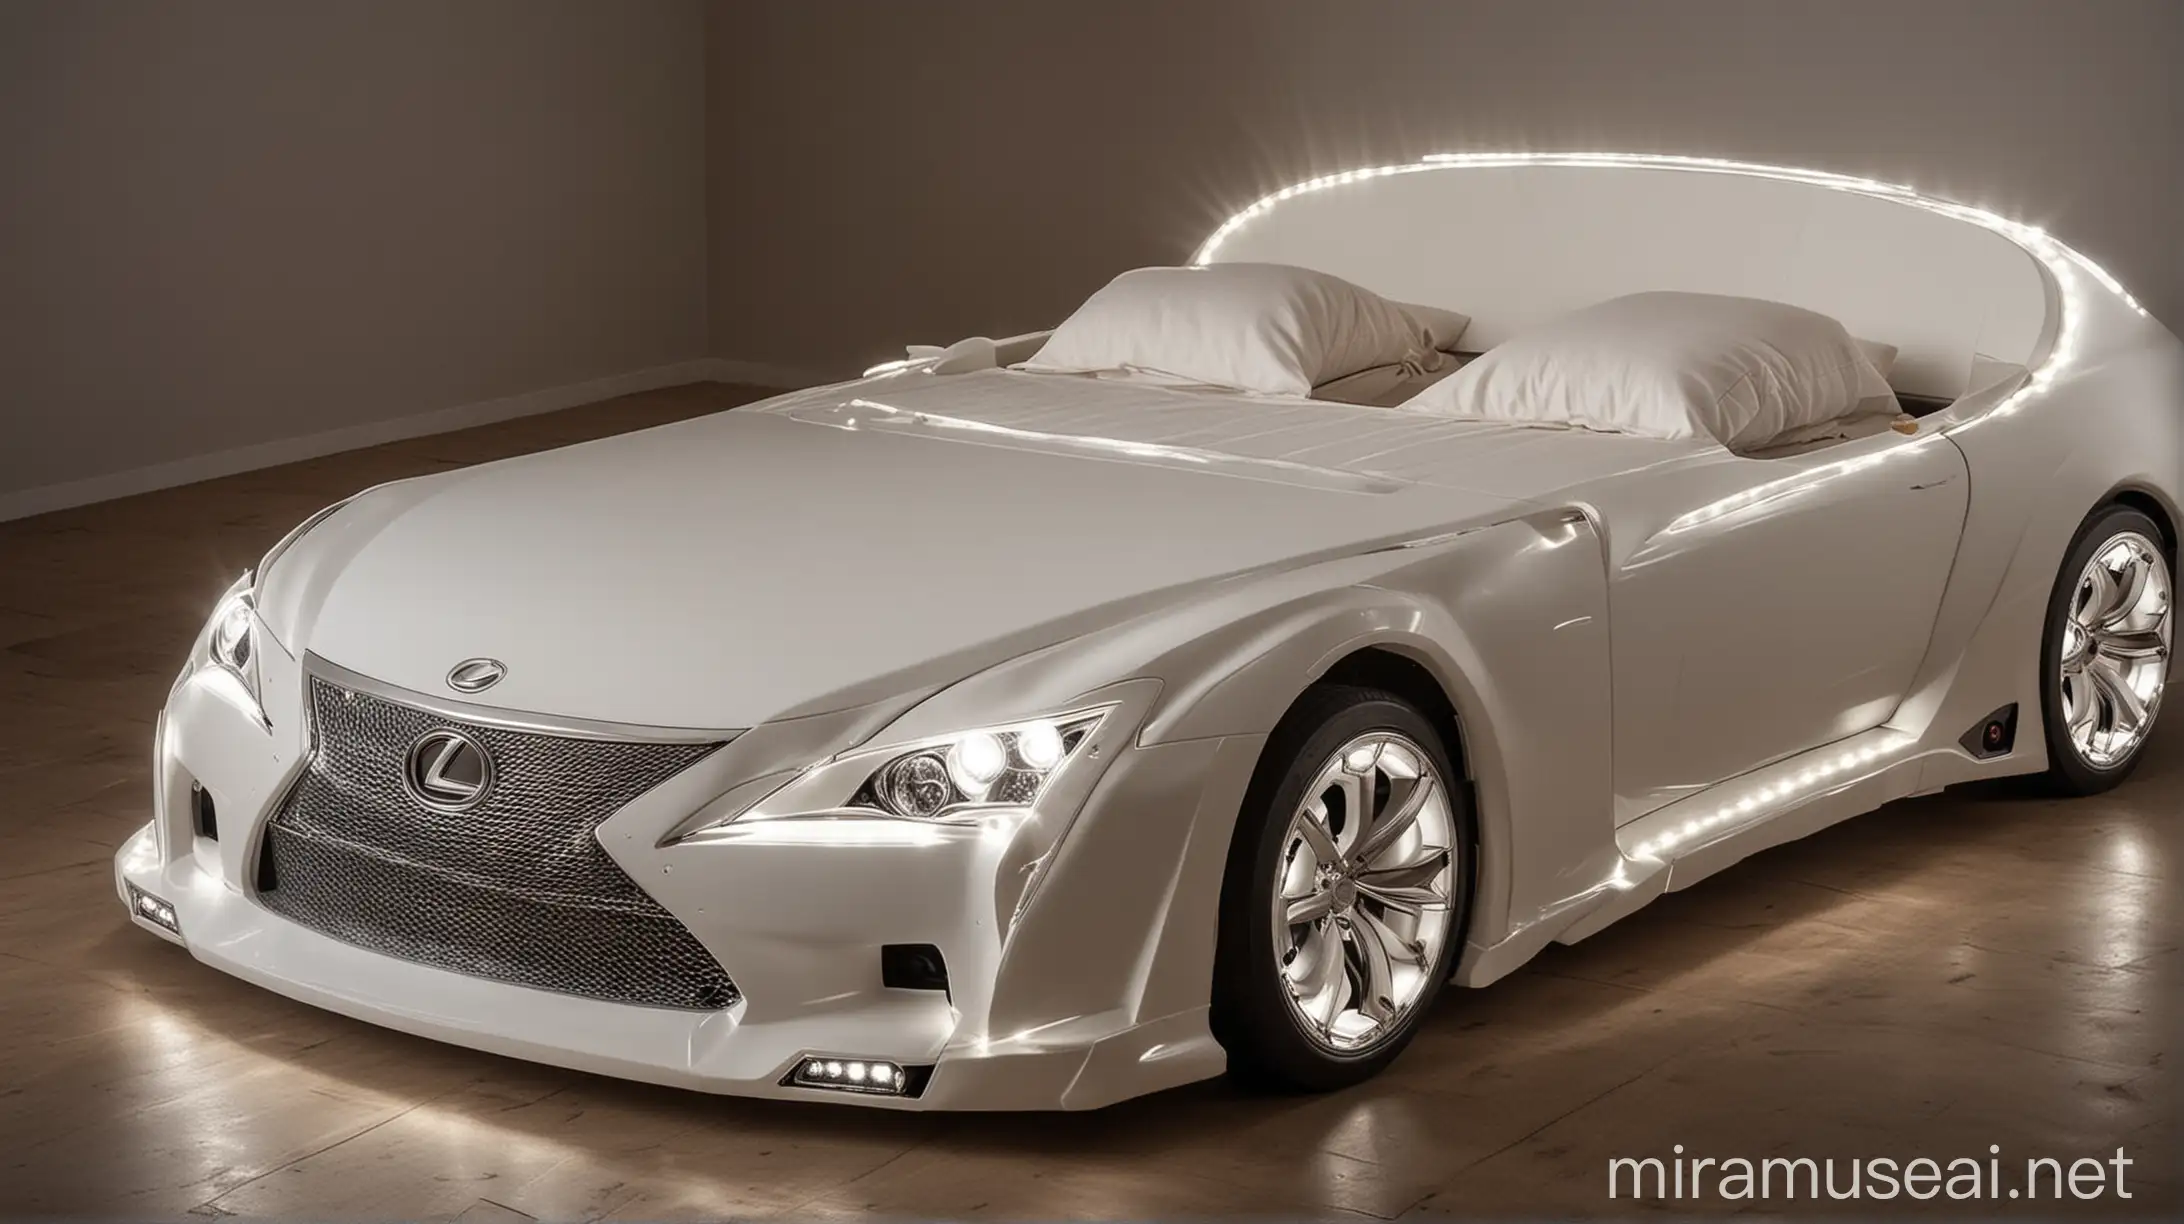 Luxurious Double Bed Shaped Like a Lexus Car with Illuminated Headlights